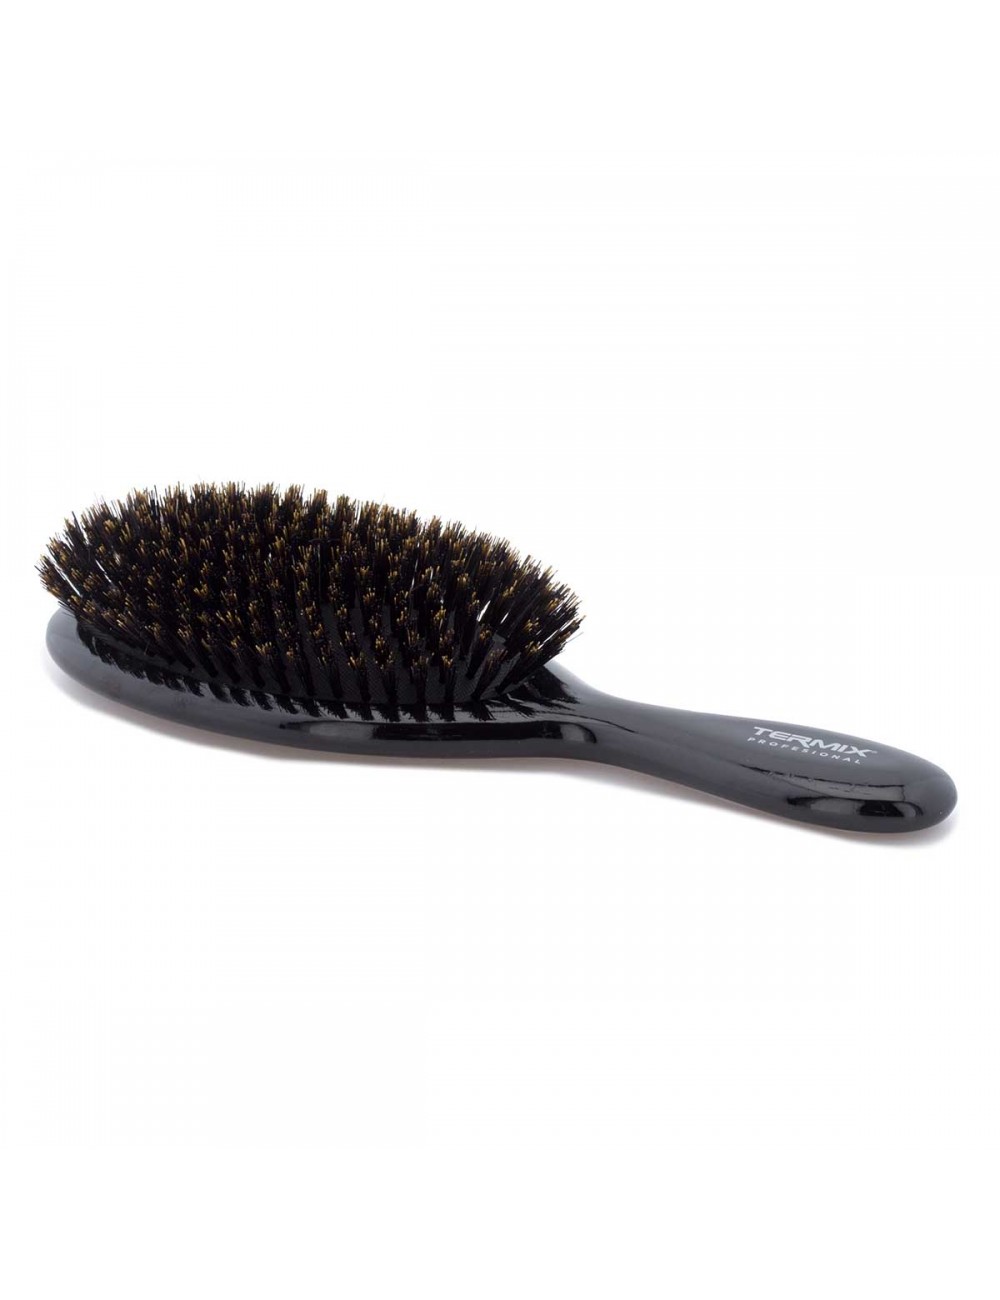 Detail Picture Of Hairbrush Nomer 31